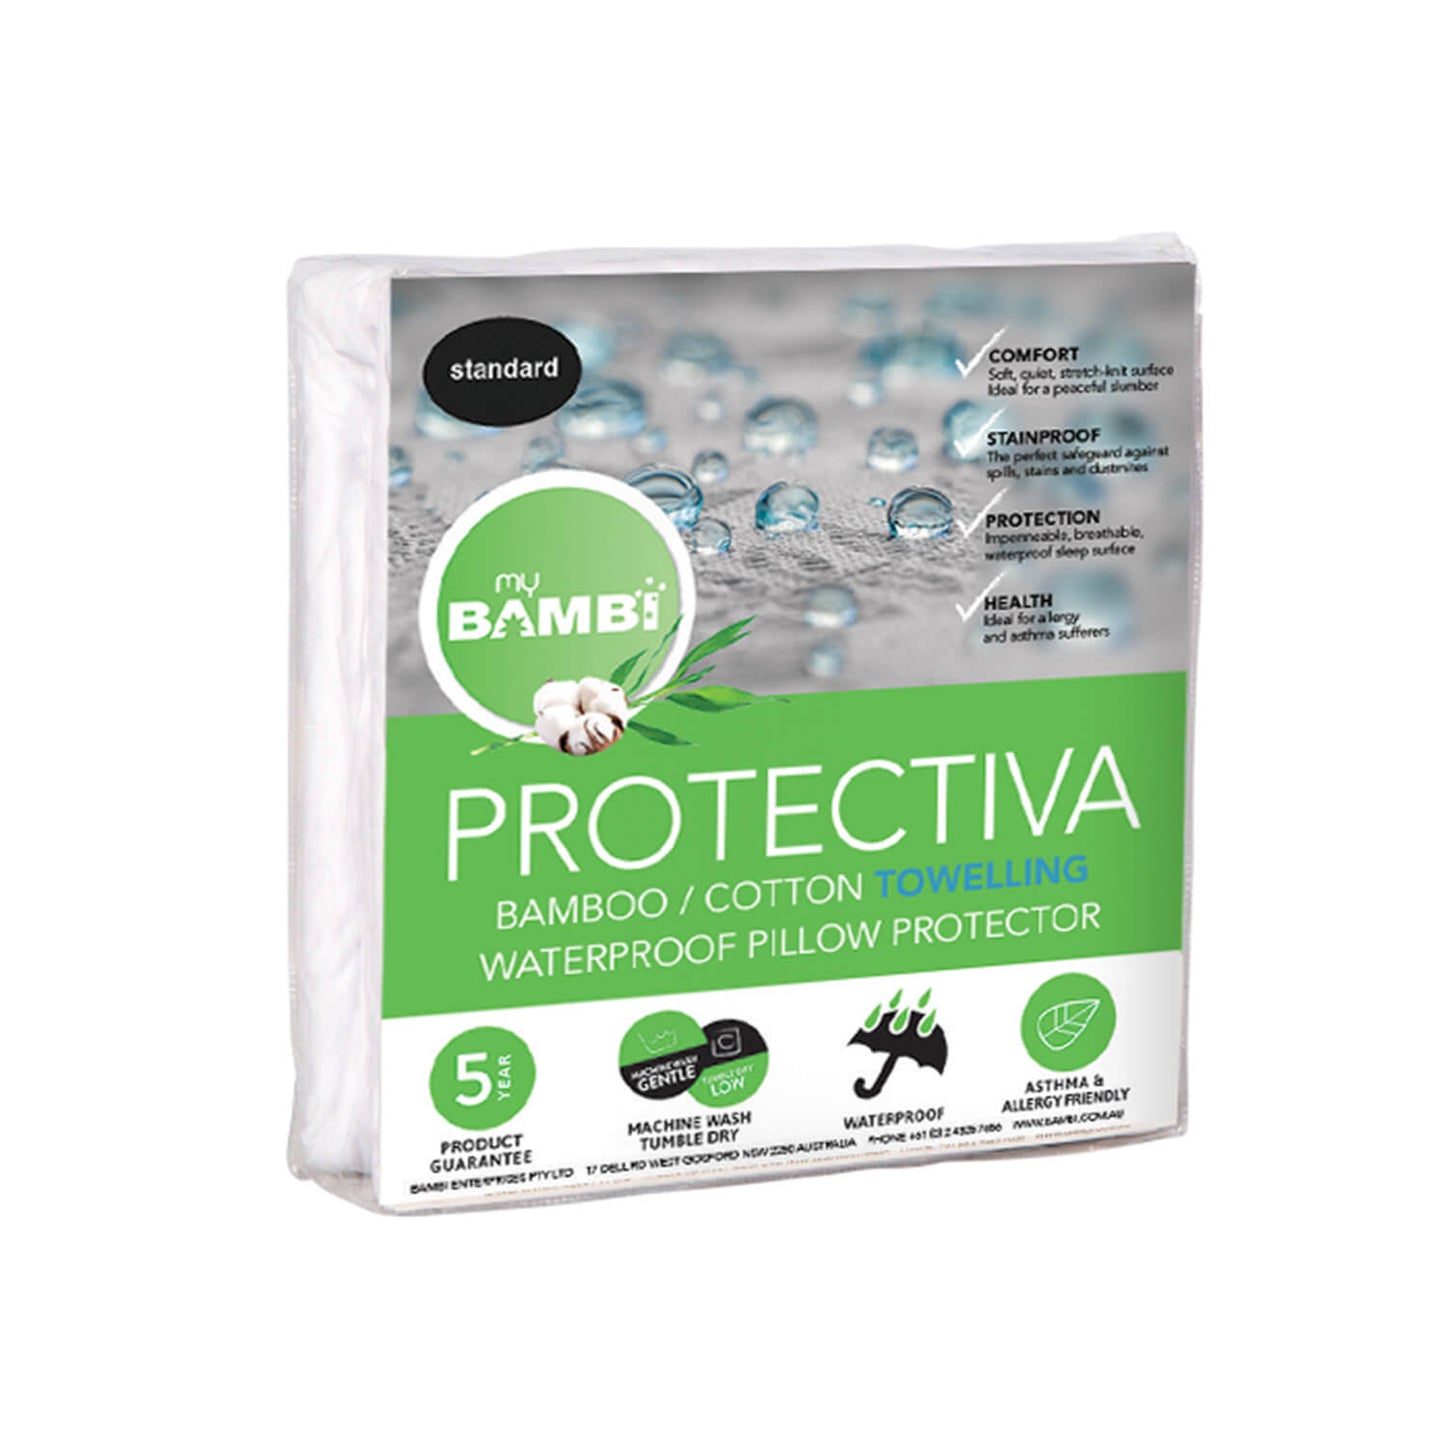 Protectiva Cotton/Bamboo Waterproof Pillow Protector – Towelling by Bambi